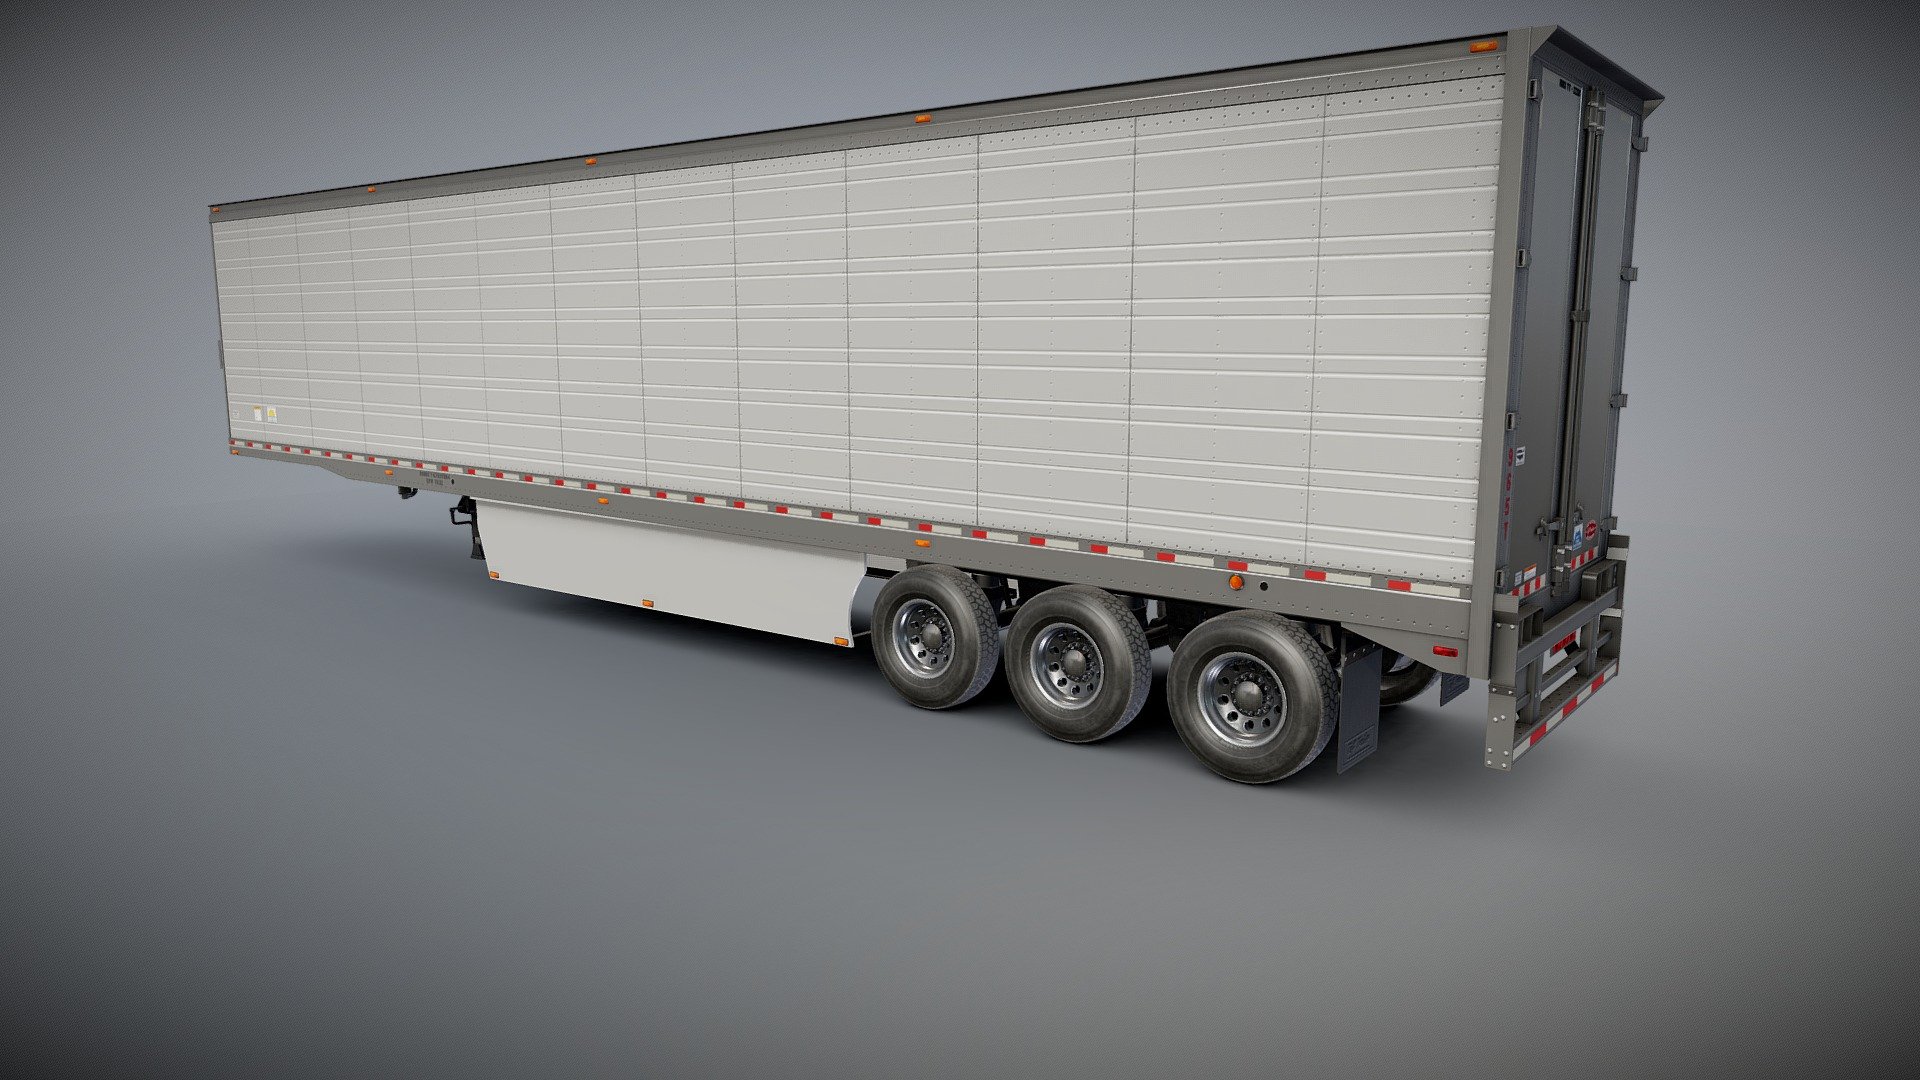 Refrigerated Trailer game ready model.

Full textured model with clean topology.

Full model - 49895 tris 29491 verts.

High detailed rims and tires, with PBR maps(Base_Color/Metallic/Normal/Roughness.png2048x2048 )

Original scale. Trailer lenght 19.2m , 3.15 , height 5.12m.

Model ready for real-time apps, games, virtual reality and augmented reality.

Asset looks accuracy and realistic and will be a good part of your project 3d model